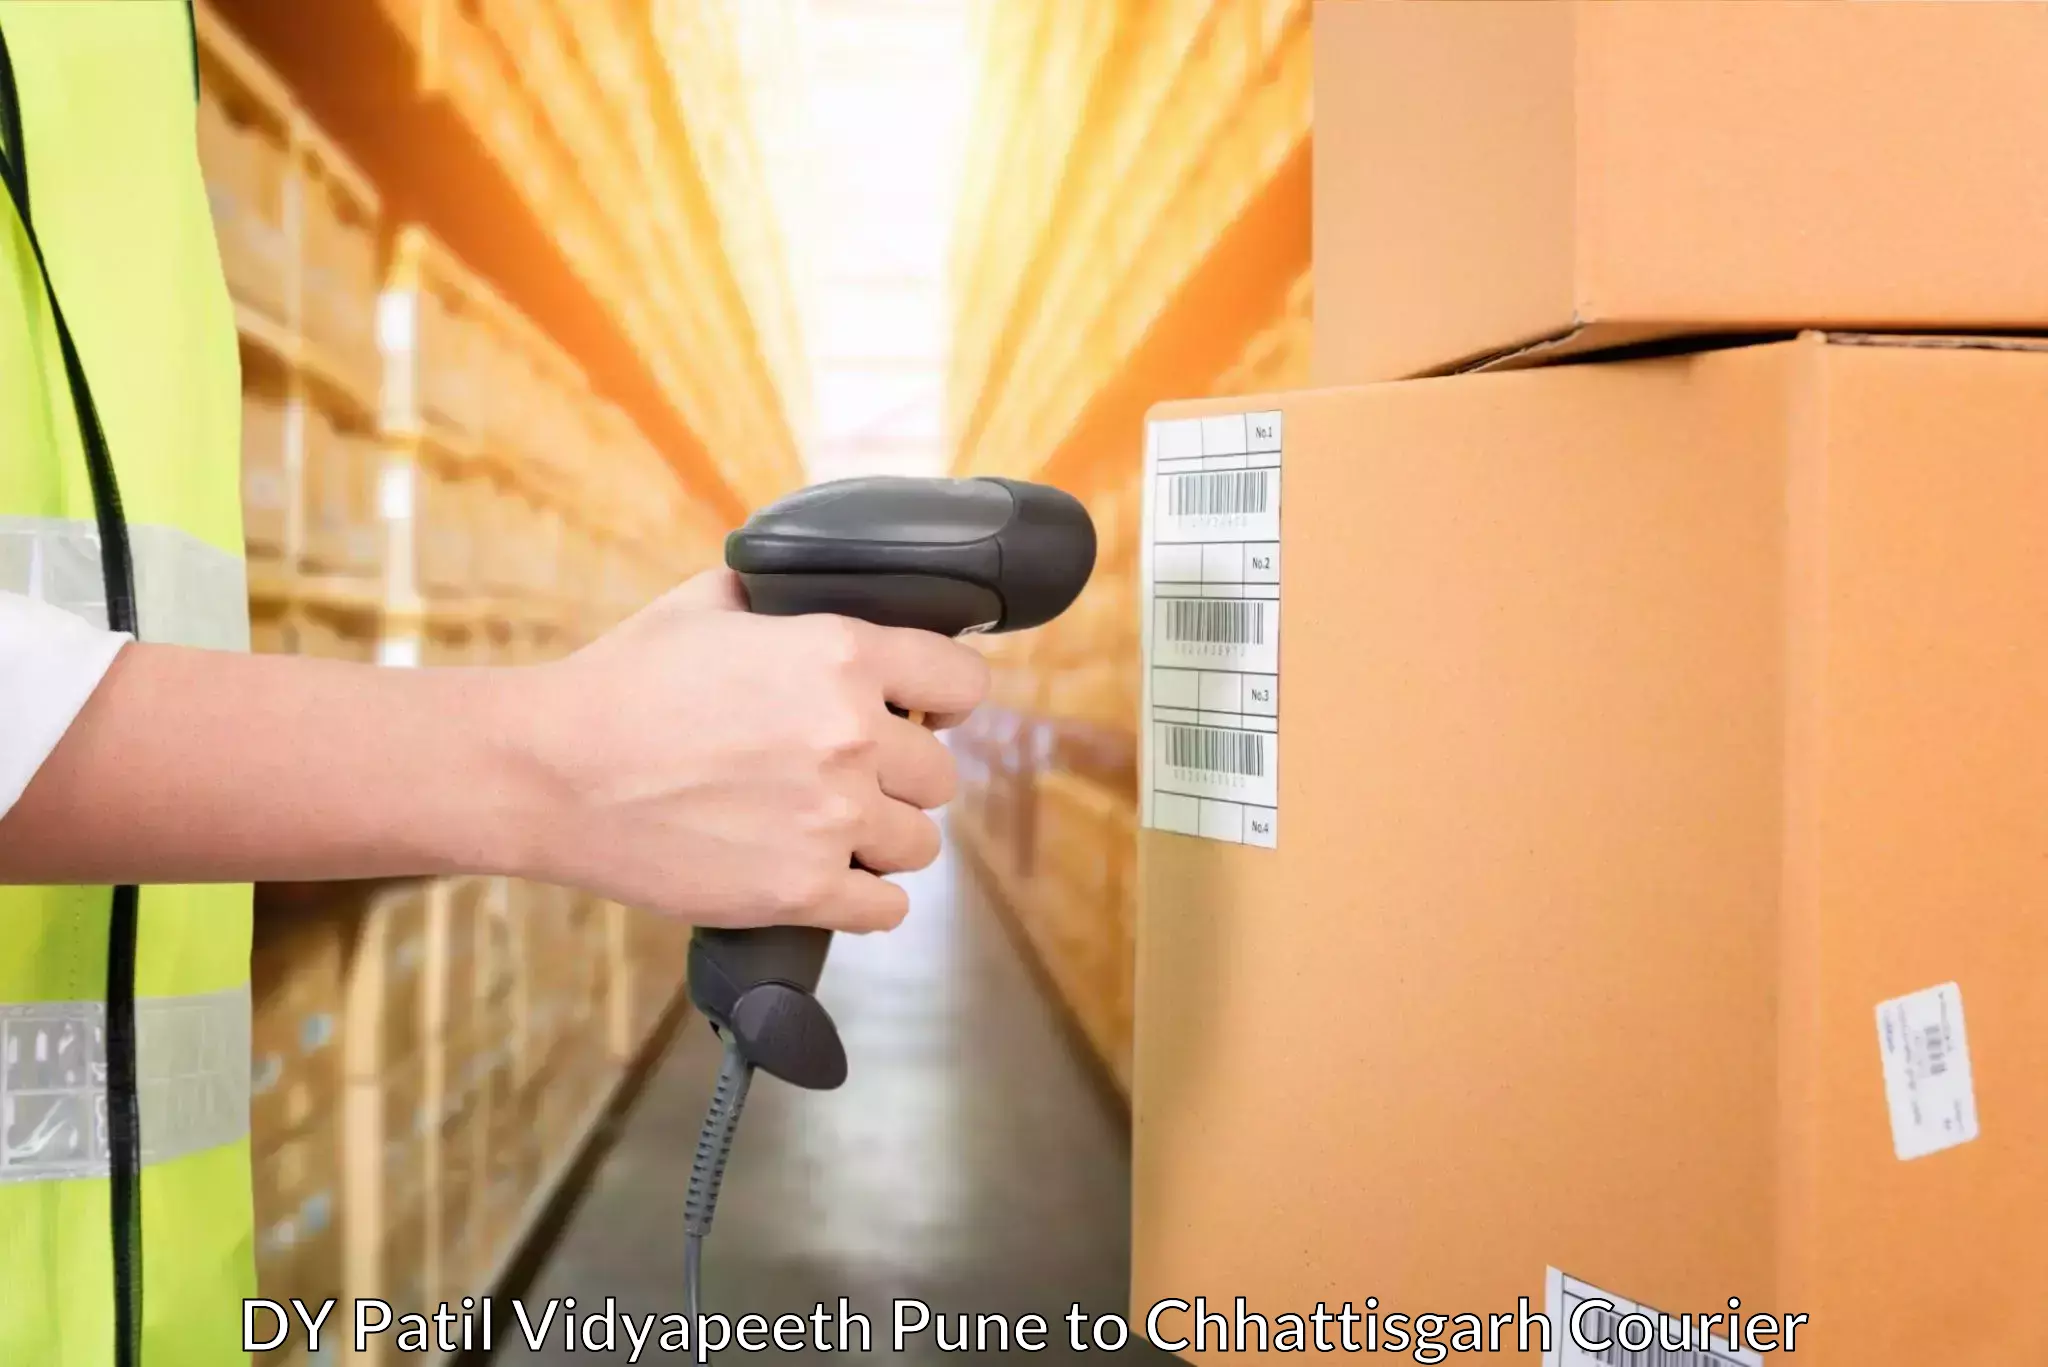 Premium courier solutions DY Patil Vidyapeeth Pune to Mahasamund